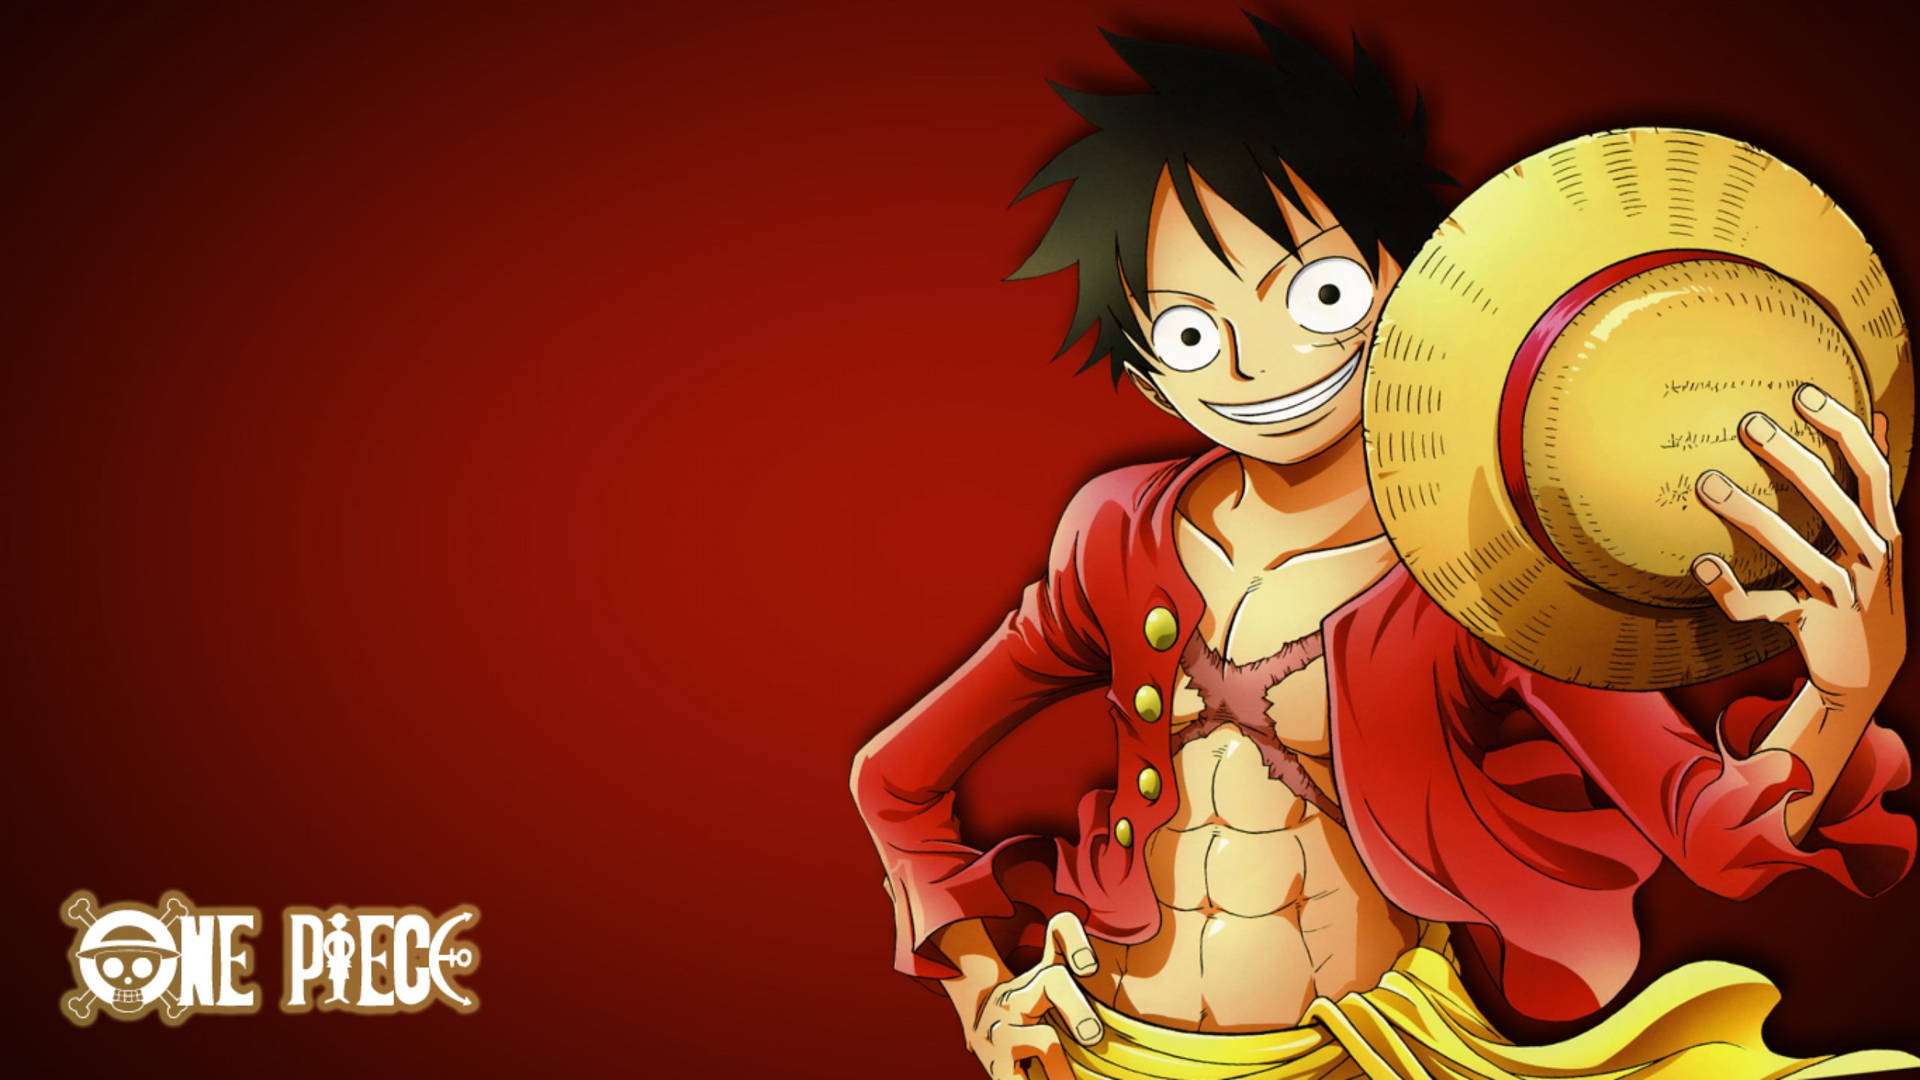 One Piece Monkey D Luffy Poster